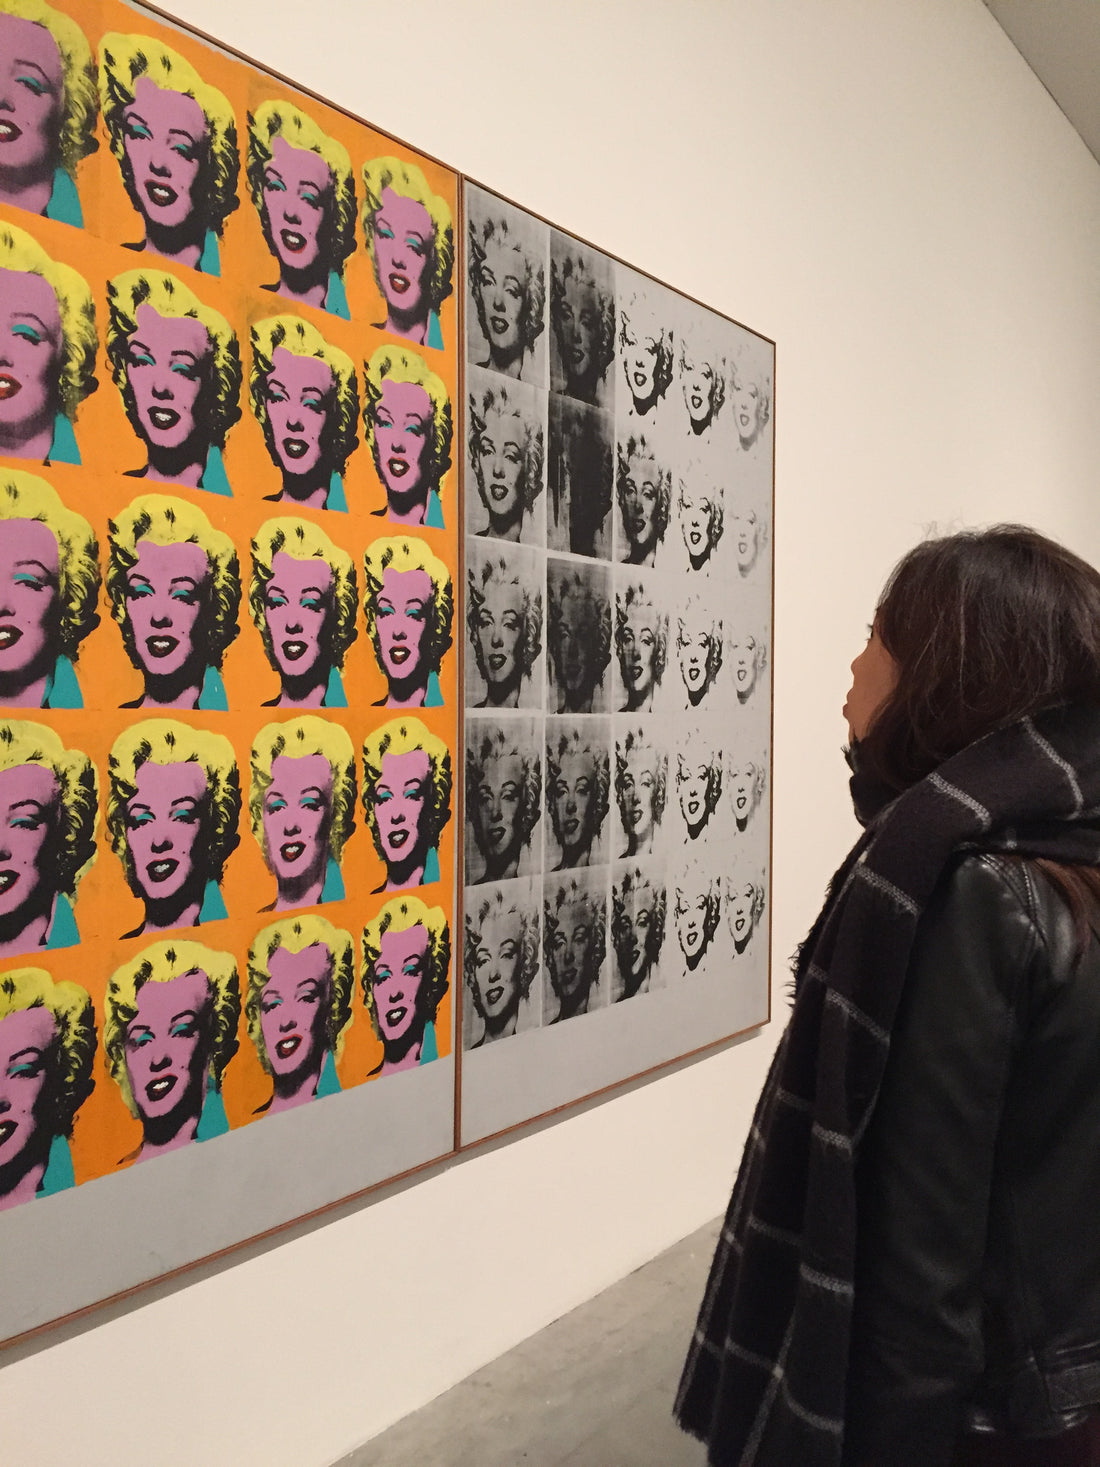 Me looking at 'Marilyn Diptych' by Andy Warhol, 1962 in tate modern